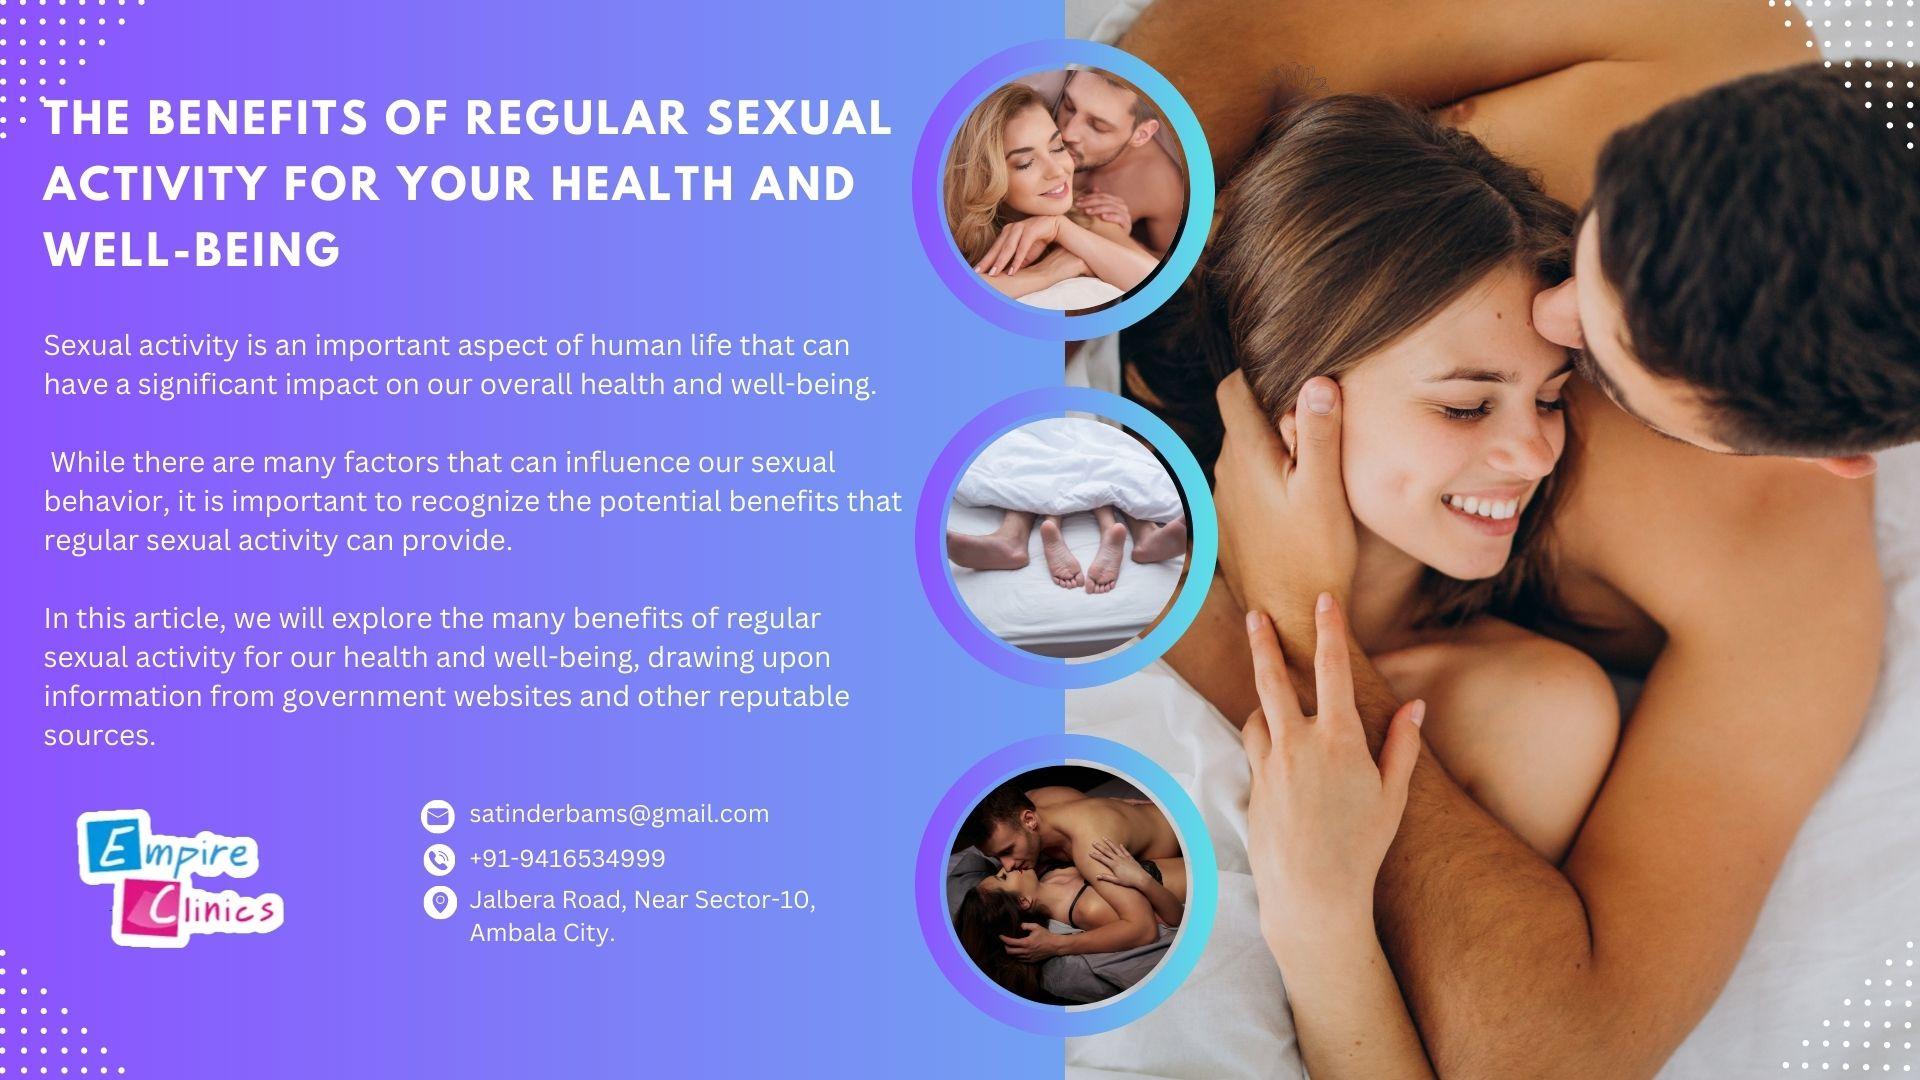 The Benefits of Regular Sexual Activity for Your Health and Well-Being